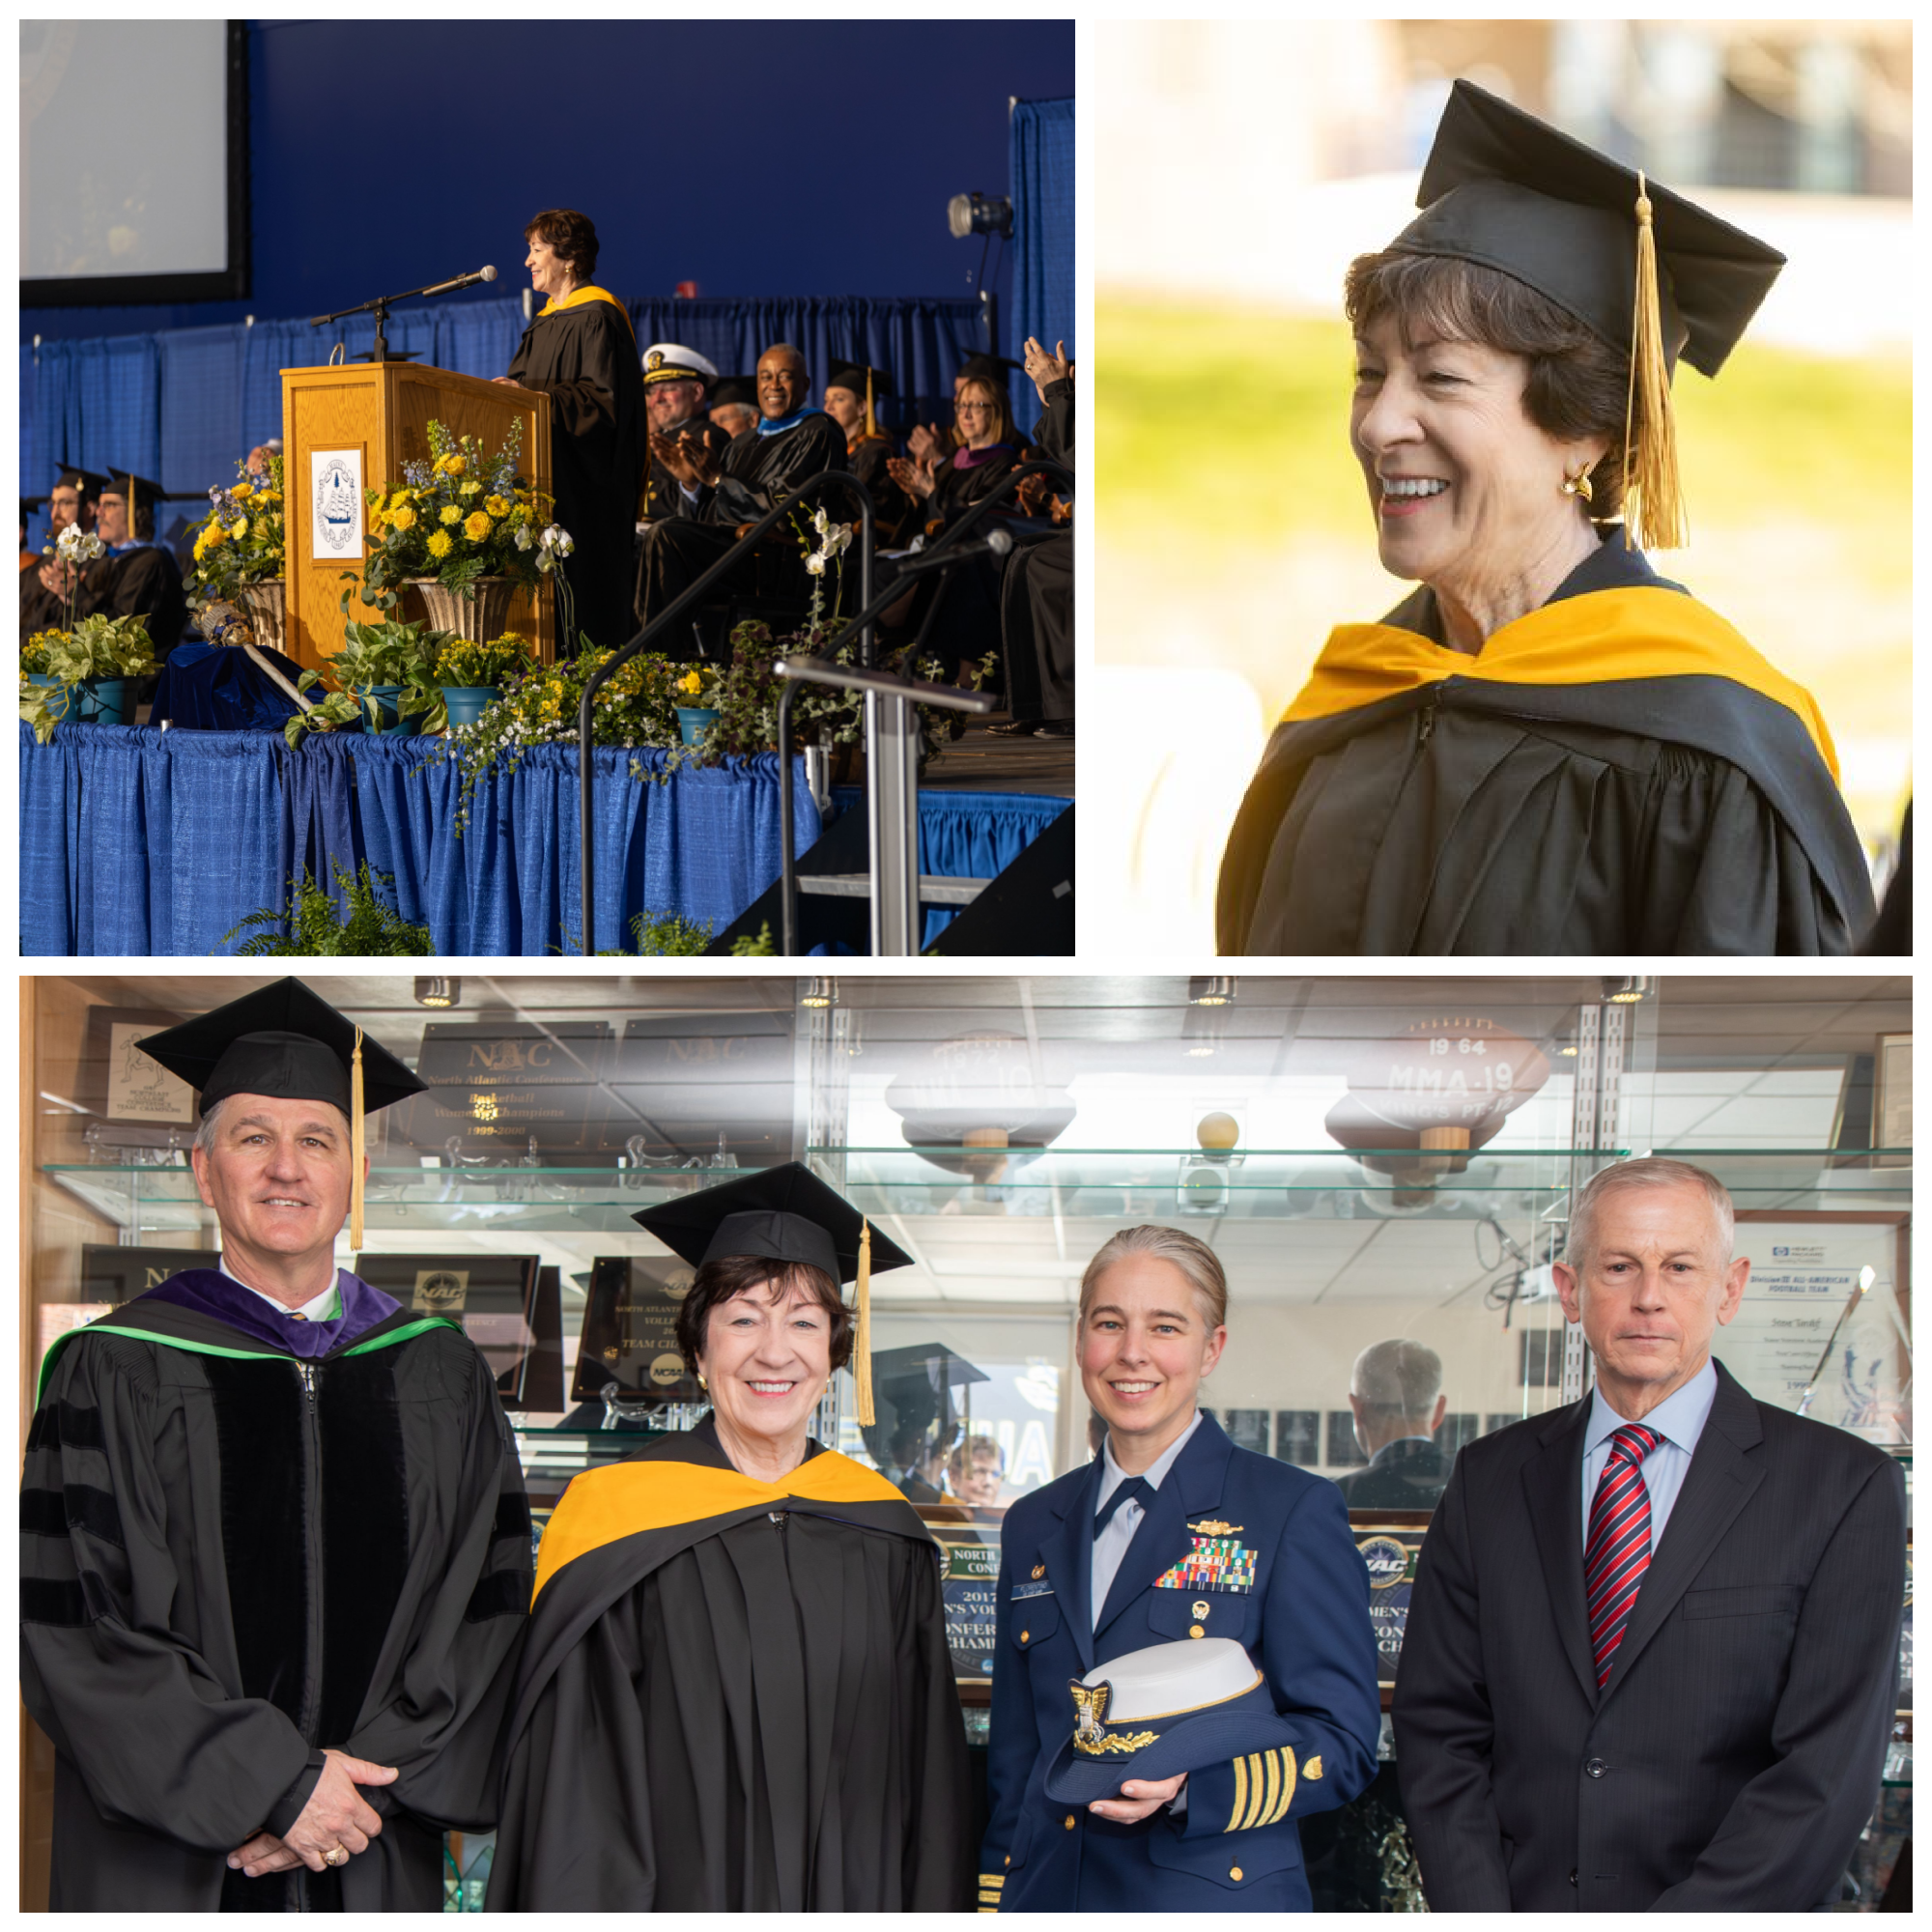 SMC delivers commencement speech at MMA